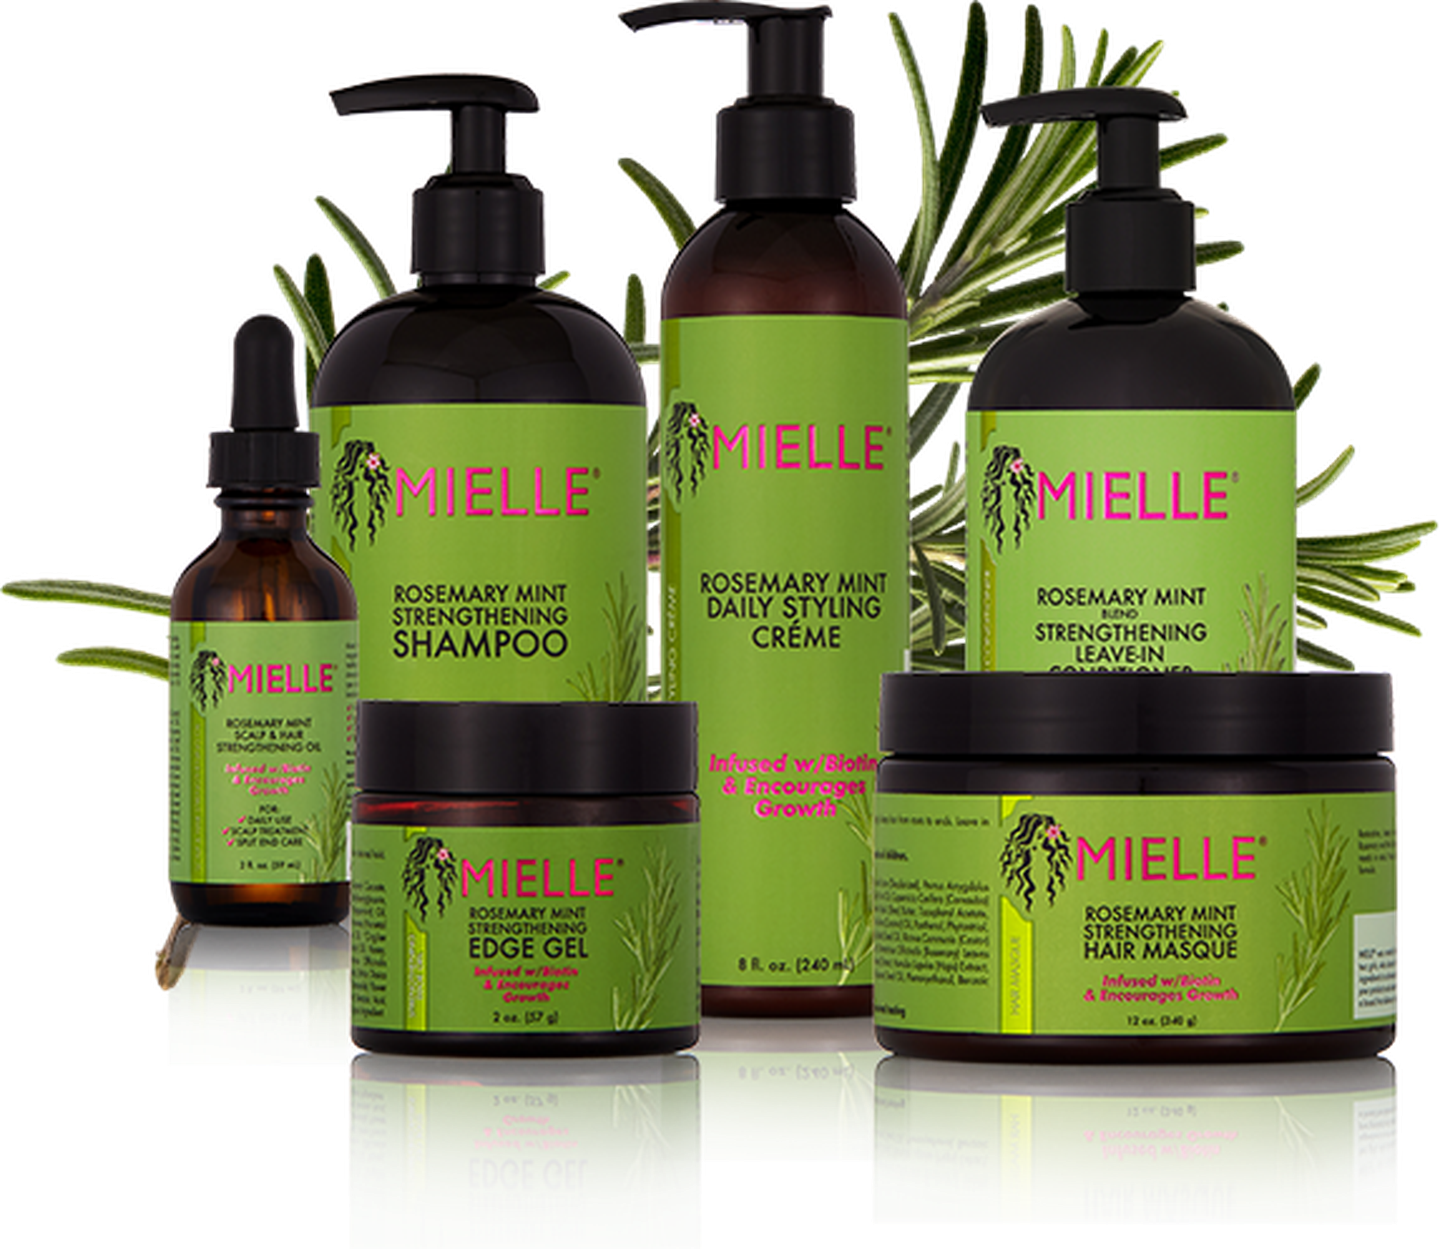 The rosemary mint line from Mielle Organics.